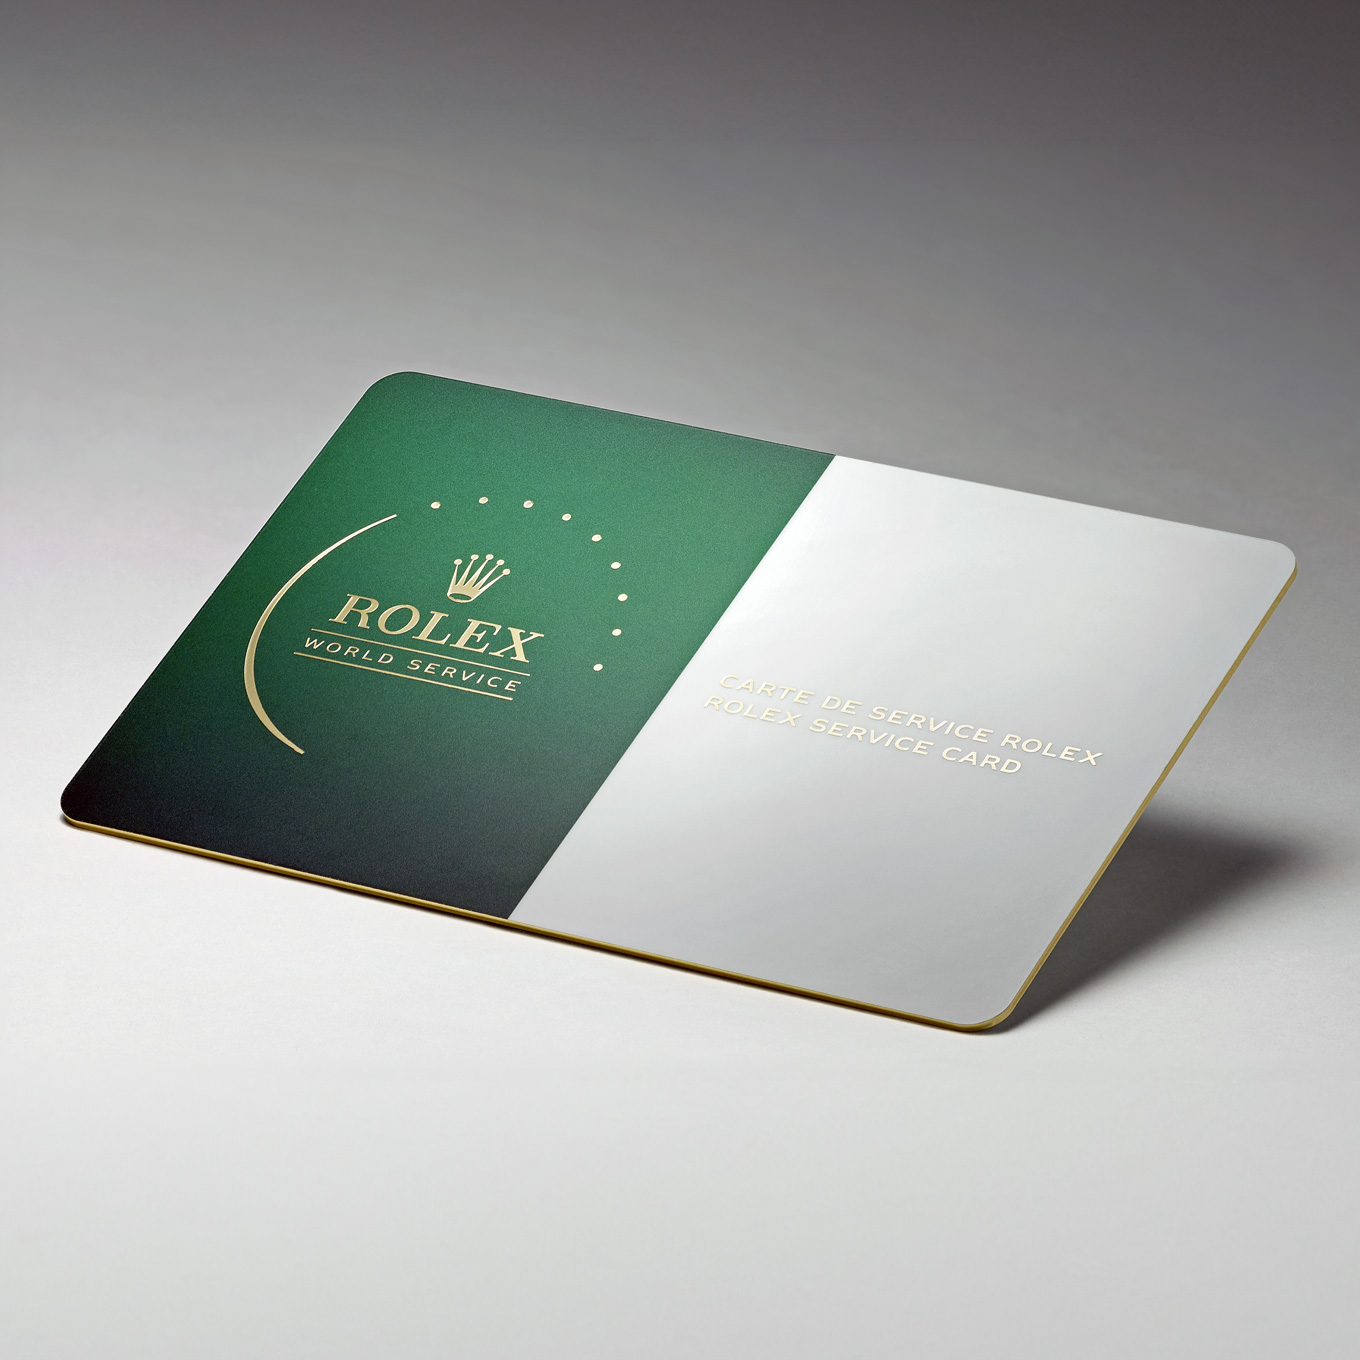 Photograph of the Rolex Service Card